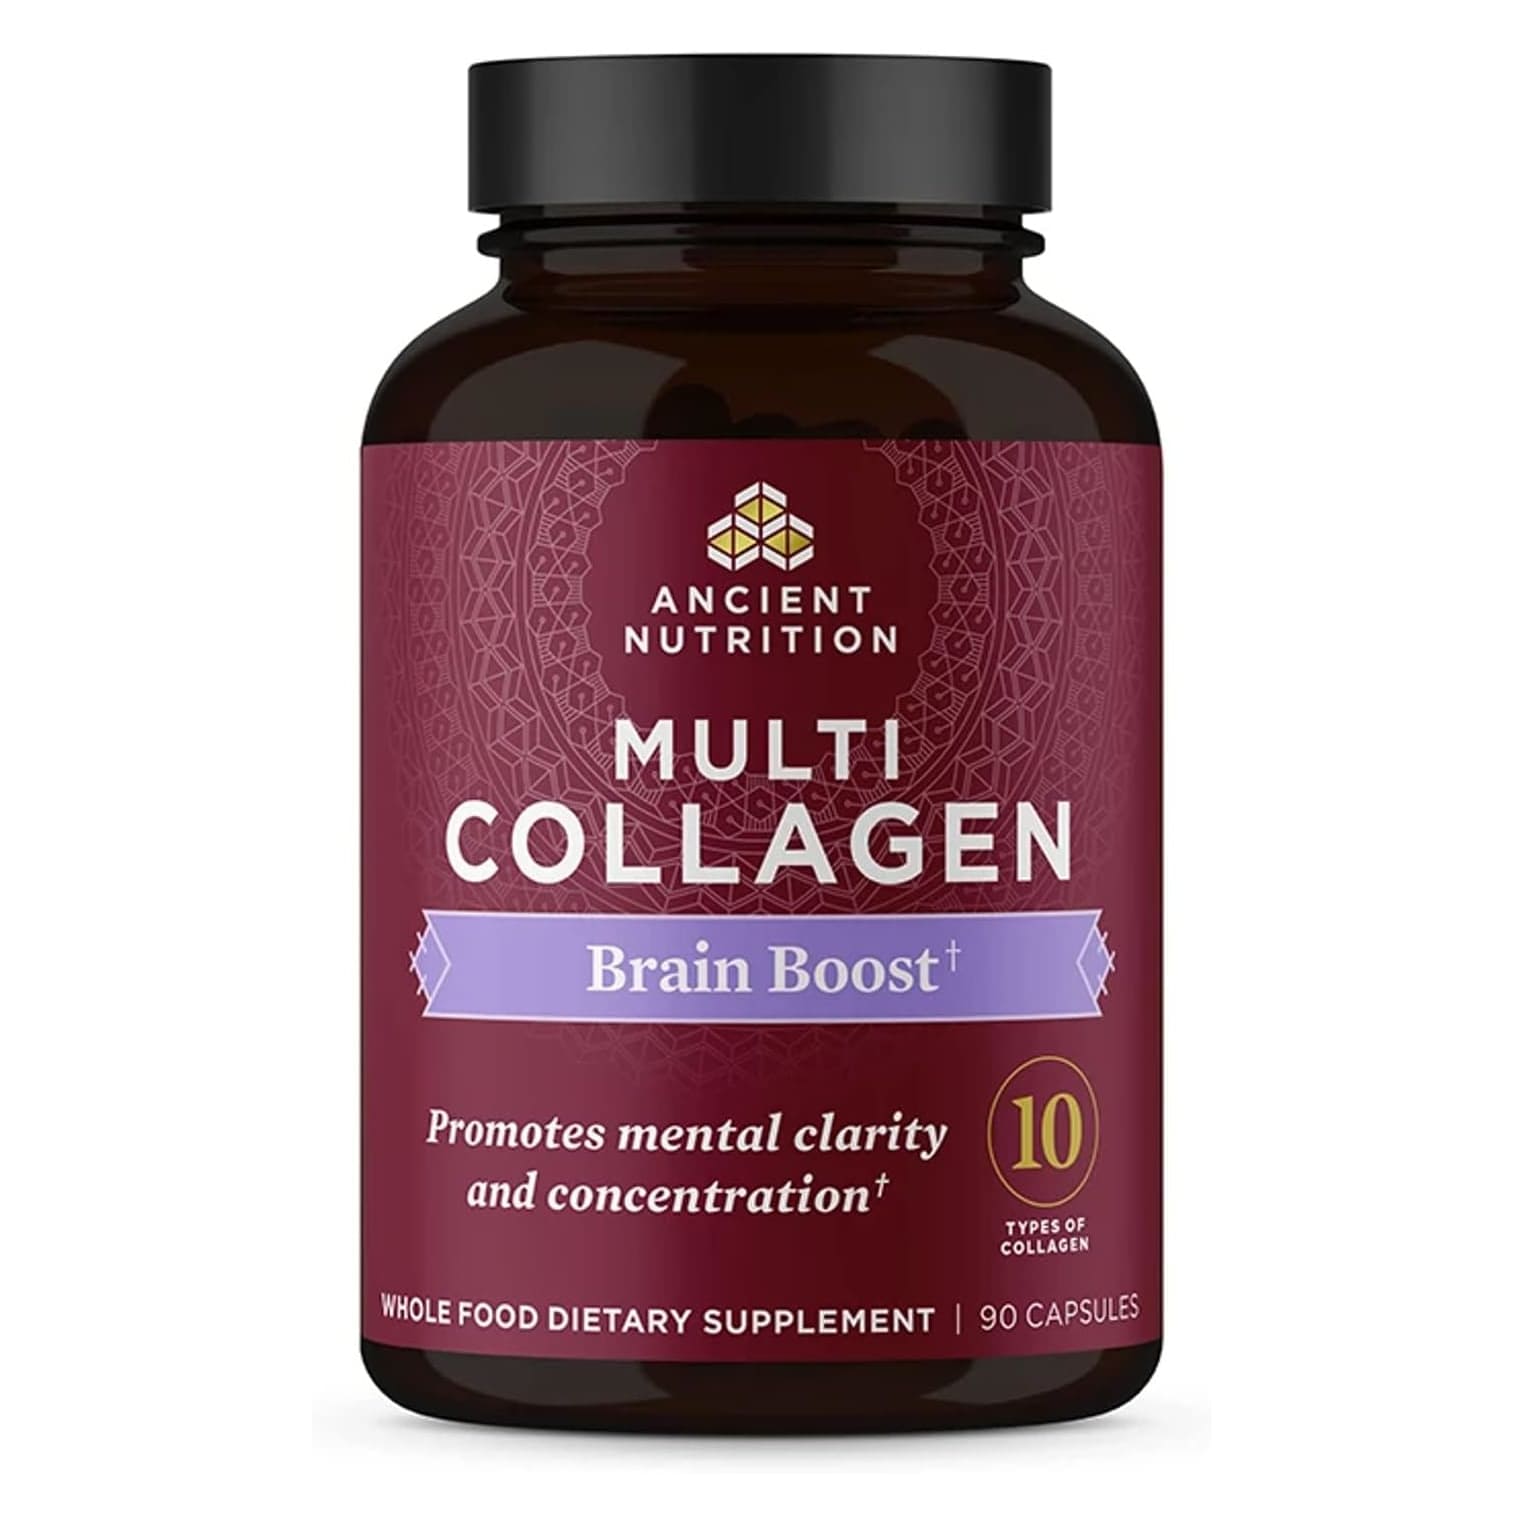 Коллаген Ancient Nutrition Multi Brain Boost 10 Types, 90 капсул коллаген skinny boost youth boost advanced multi peptides 454 гр